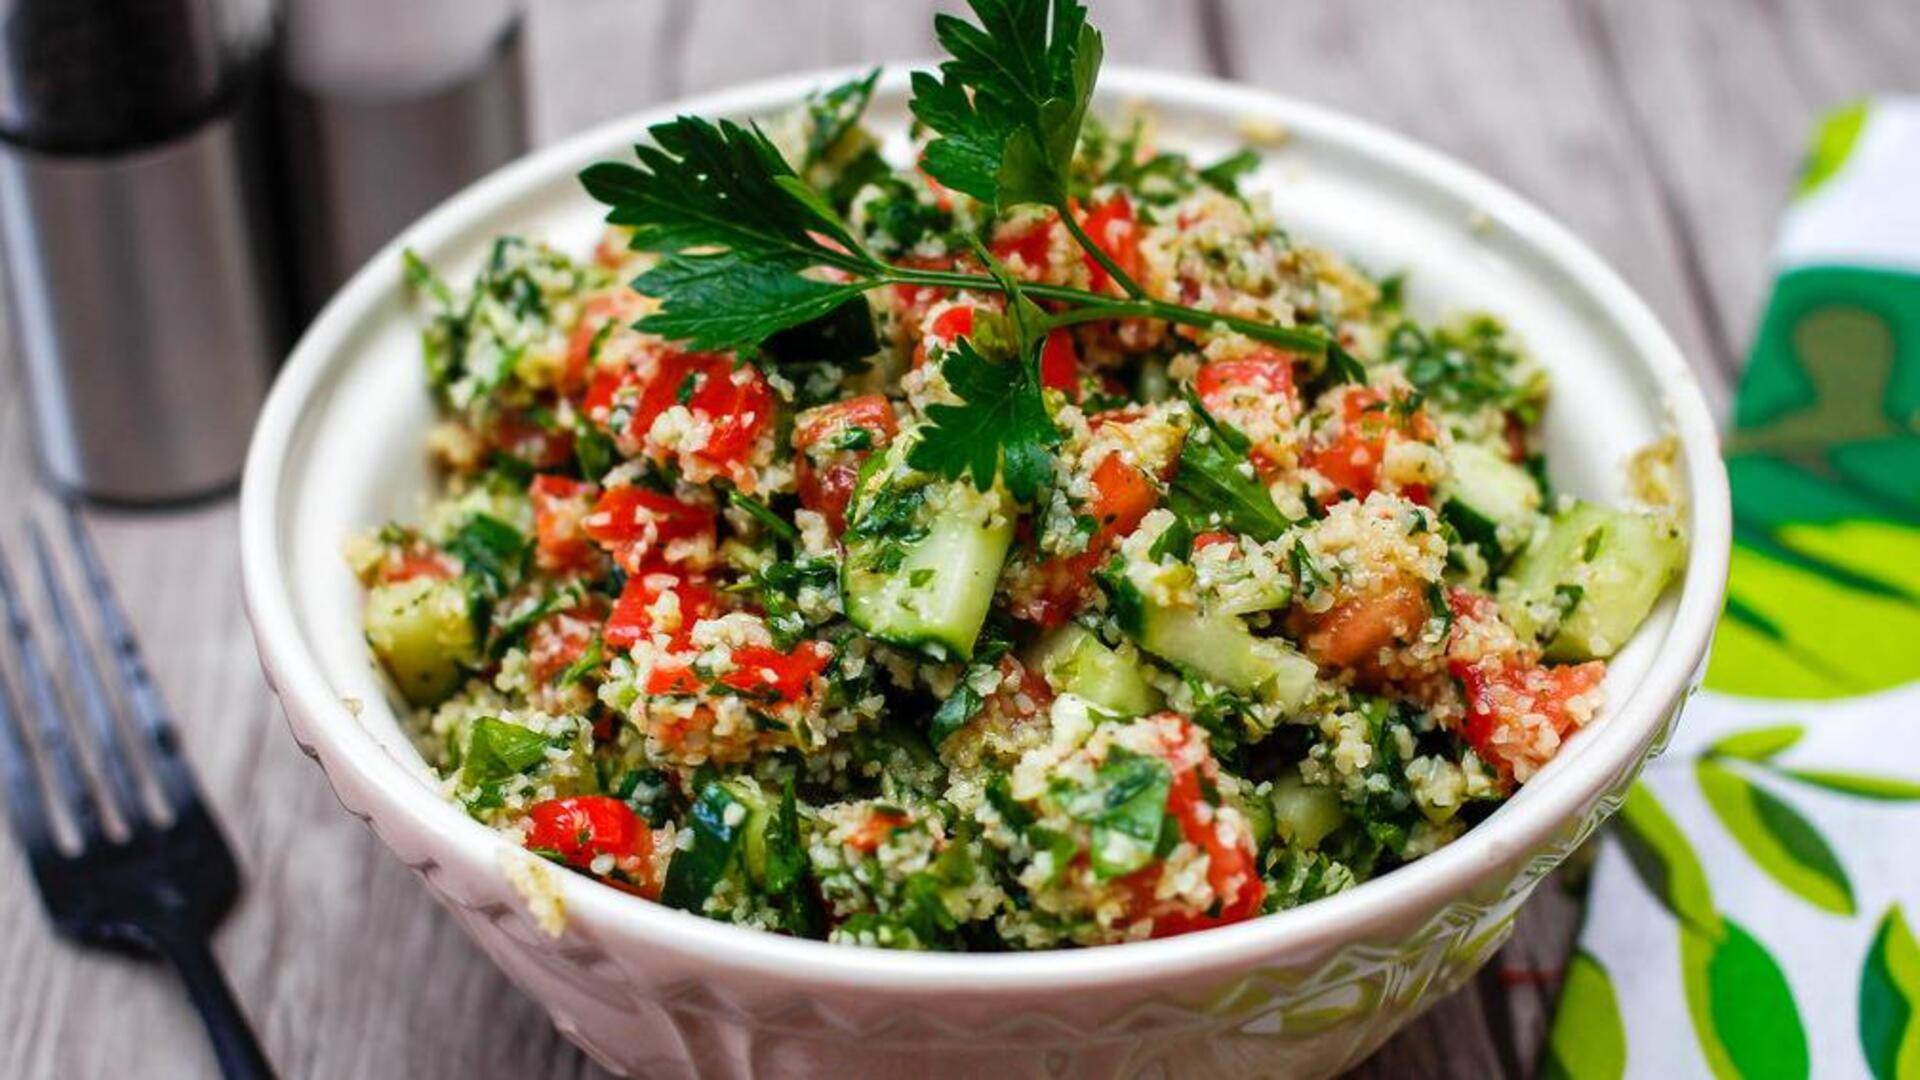 It's recipe time! Cook this traditional tabbouleh salad